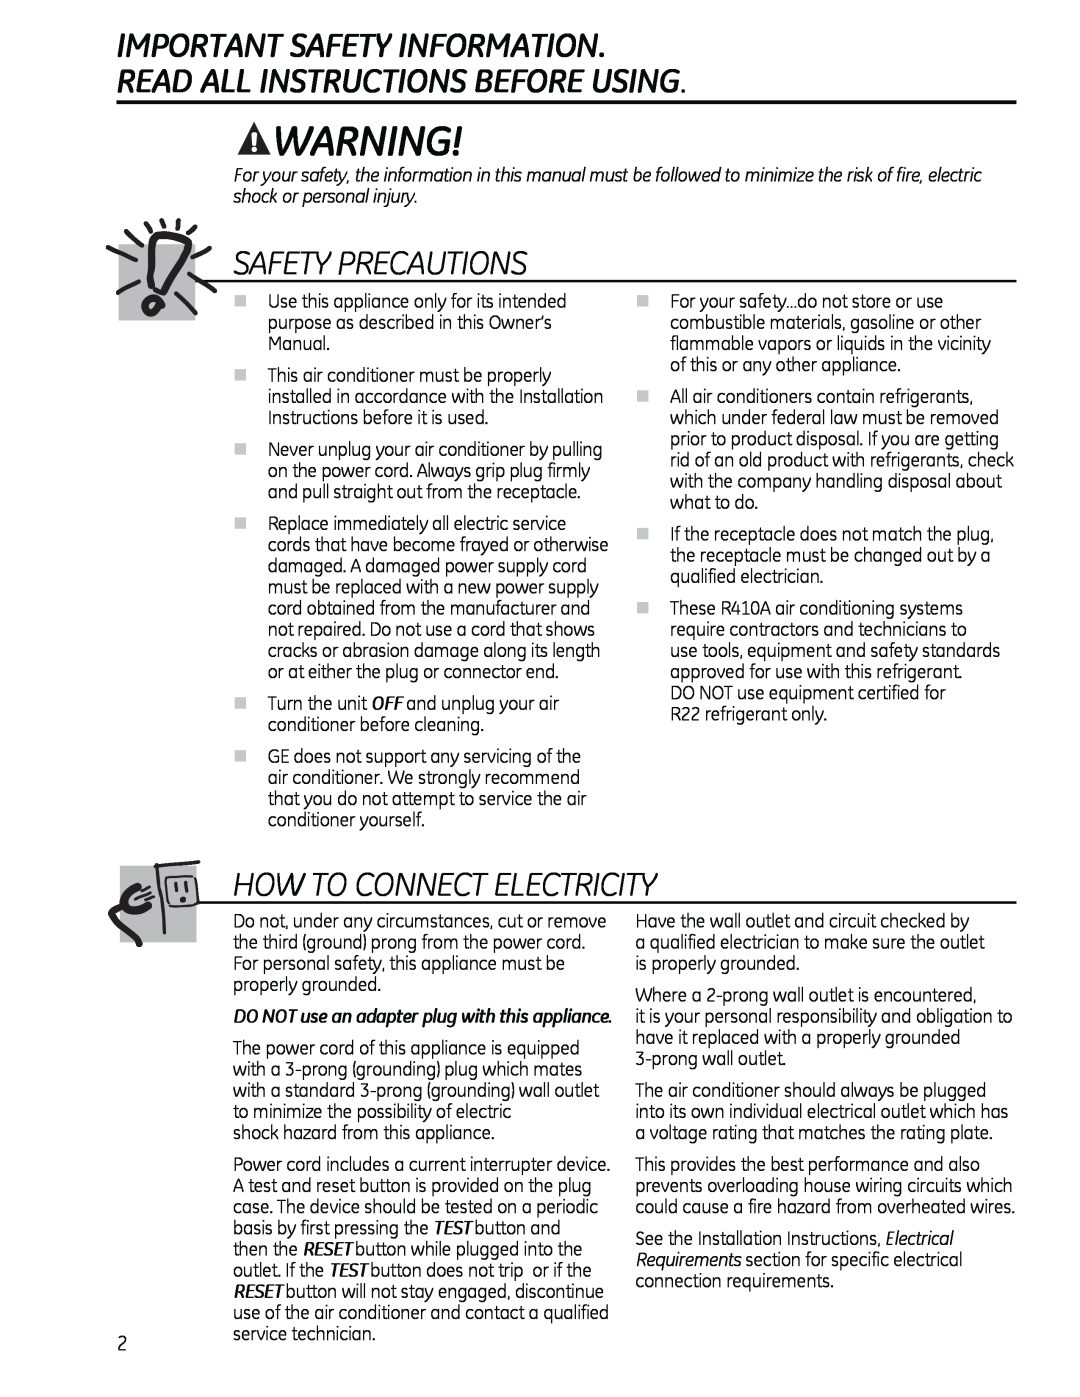 GE AHM18 Important Safety Information, Read All Instructions Before Using, Safety Precautions, How To Connect Electricity 